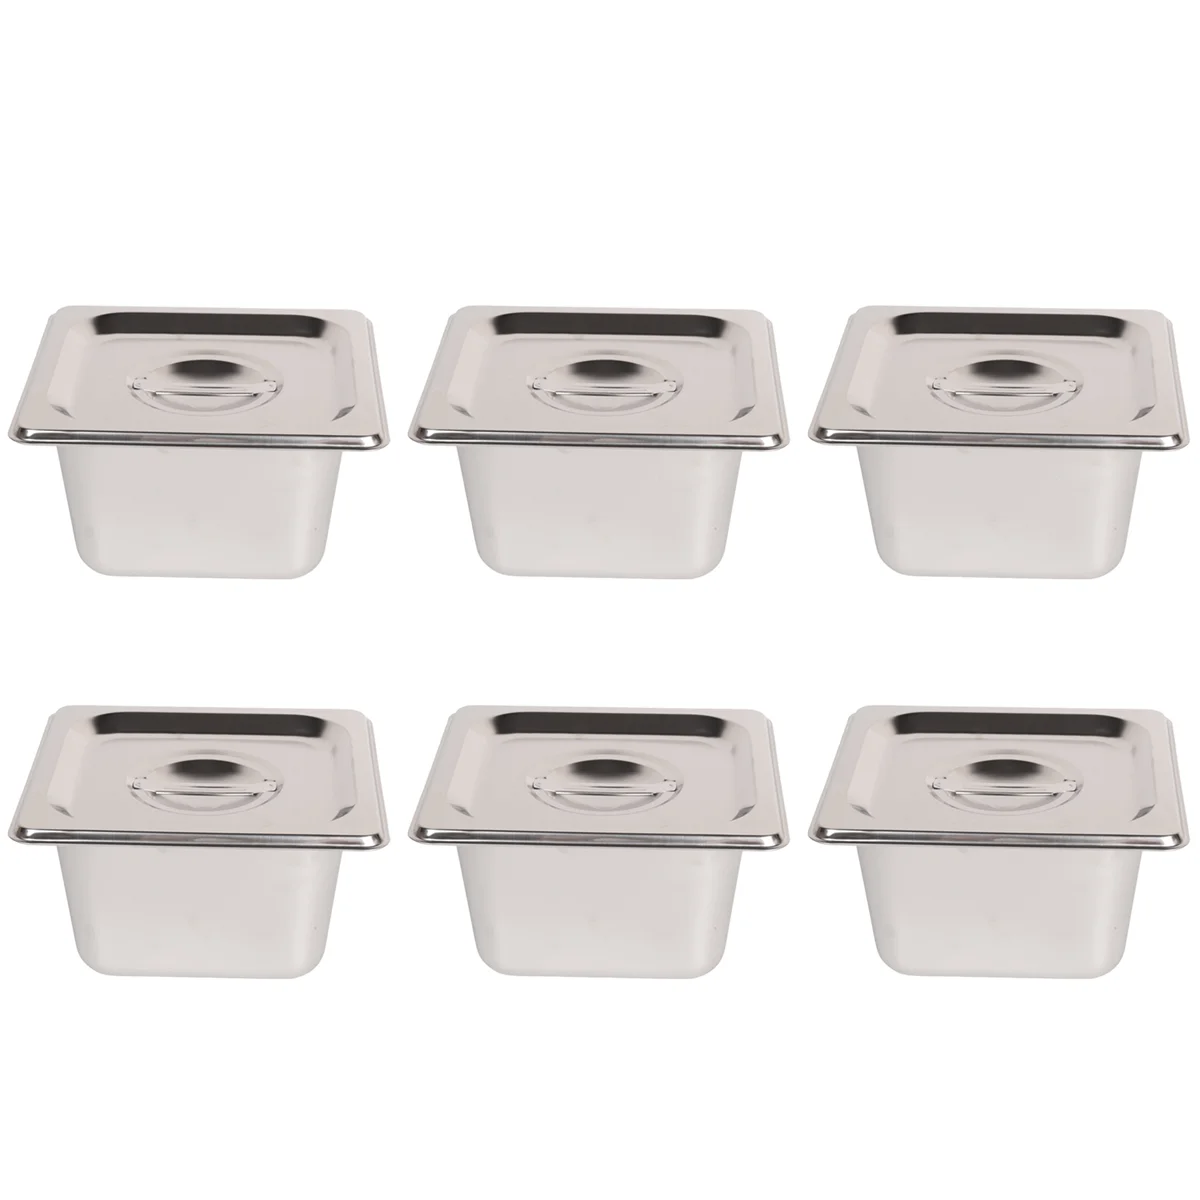 

6 Pack Anti-Jam Slotted Hotel Pans with Lids, 1/6 Size 4 Inch Deep, Commercial 18/8 Stainless Steel Steam Table Food Pan